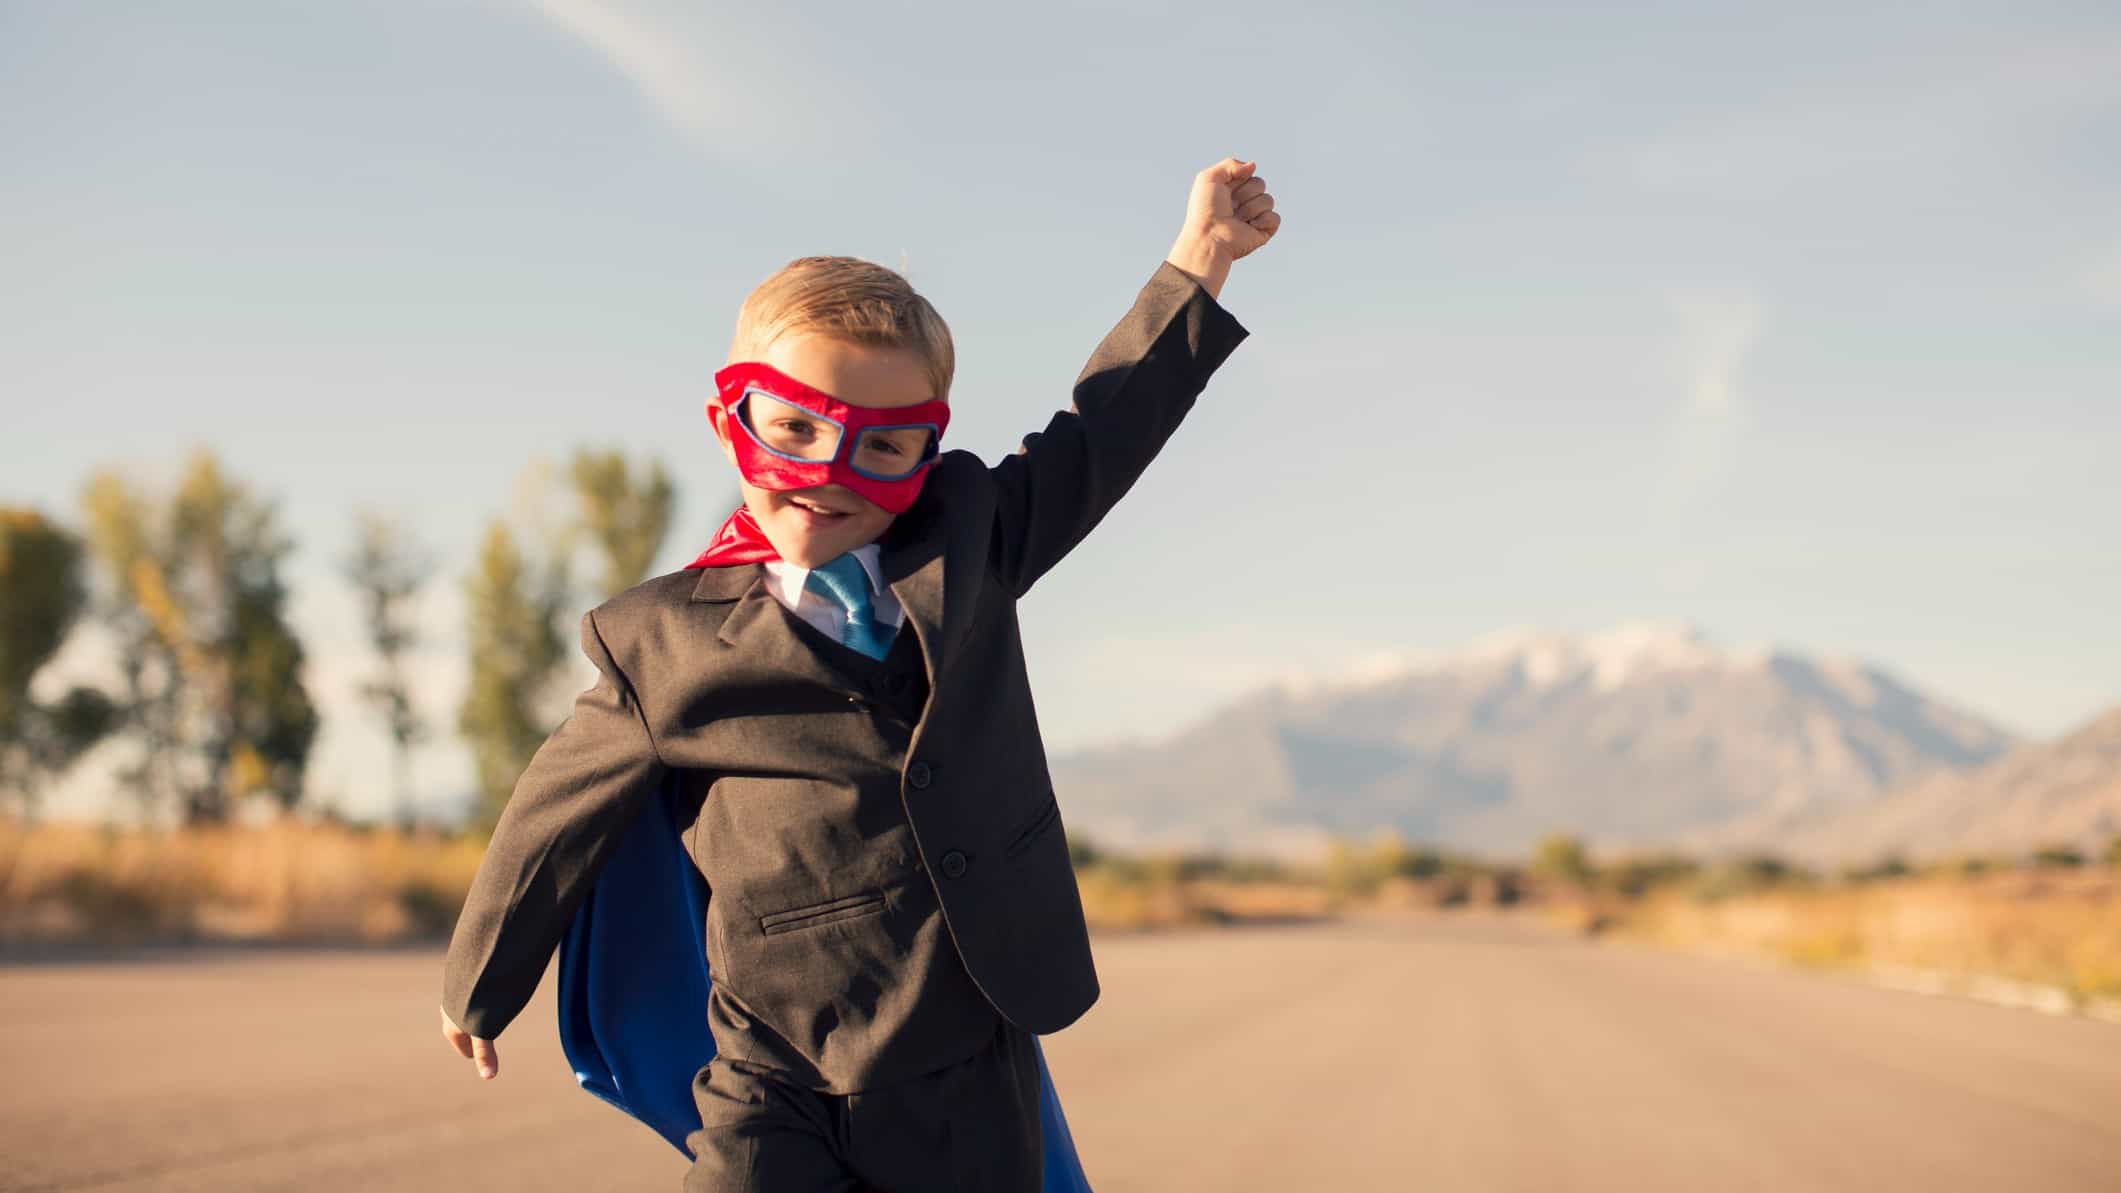 A small child dressed in a business suit and a superhero mask and cape holds a hand aloft in a superhero pose against the background of a barren, dusty landscape.